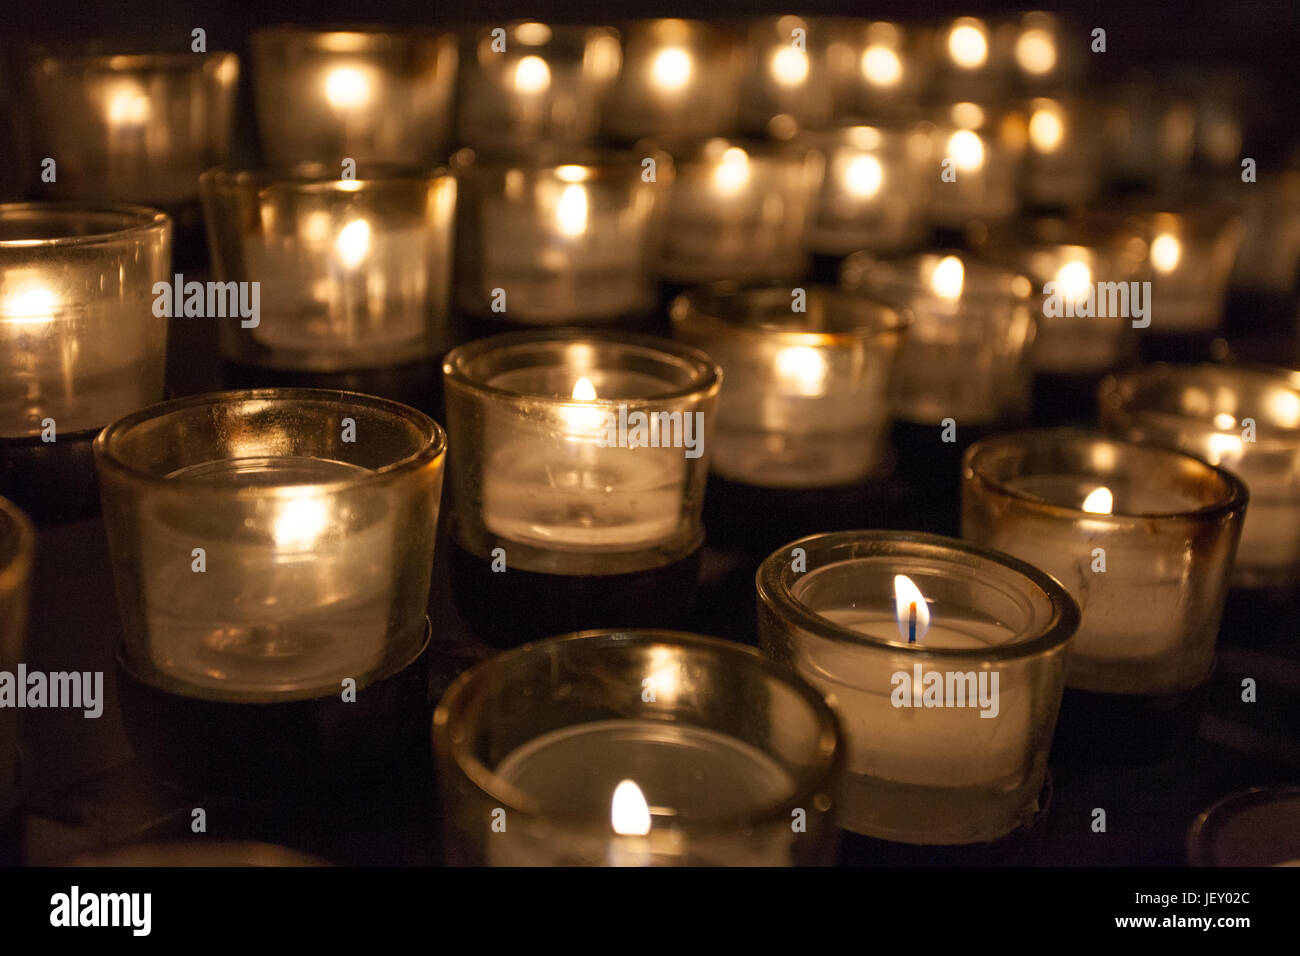 Prayer Candles in a church Stock Photo